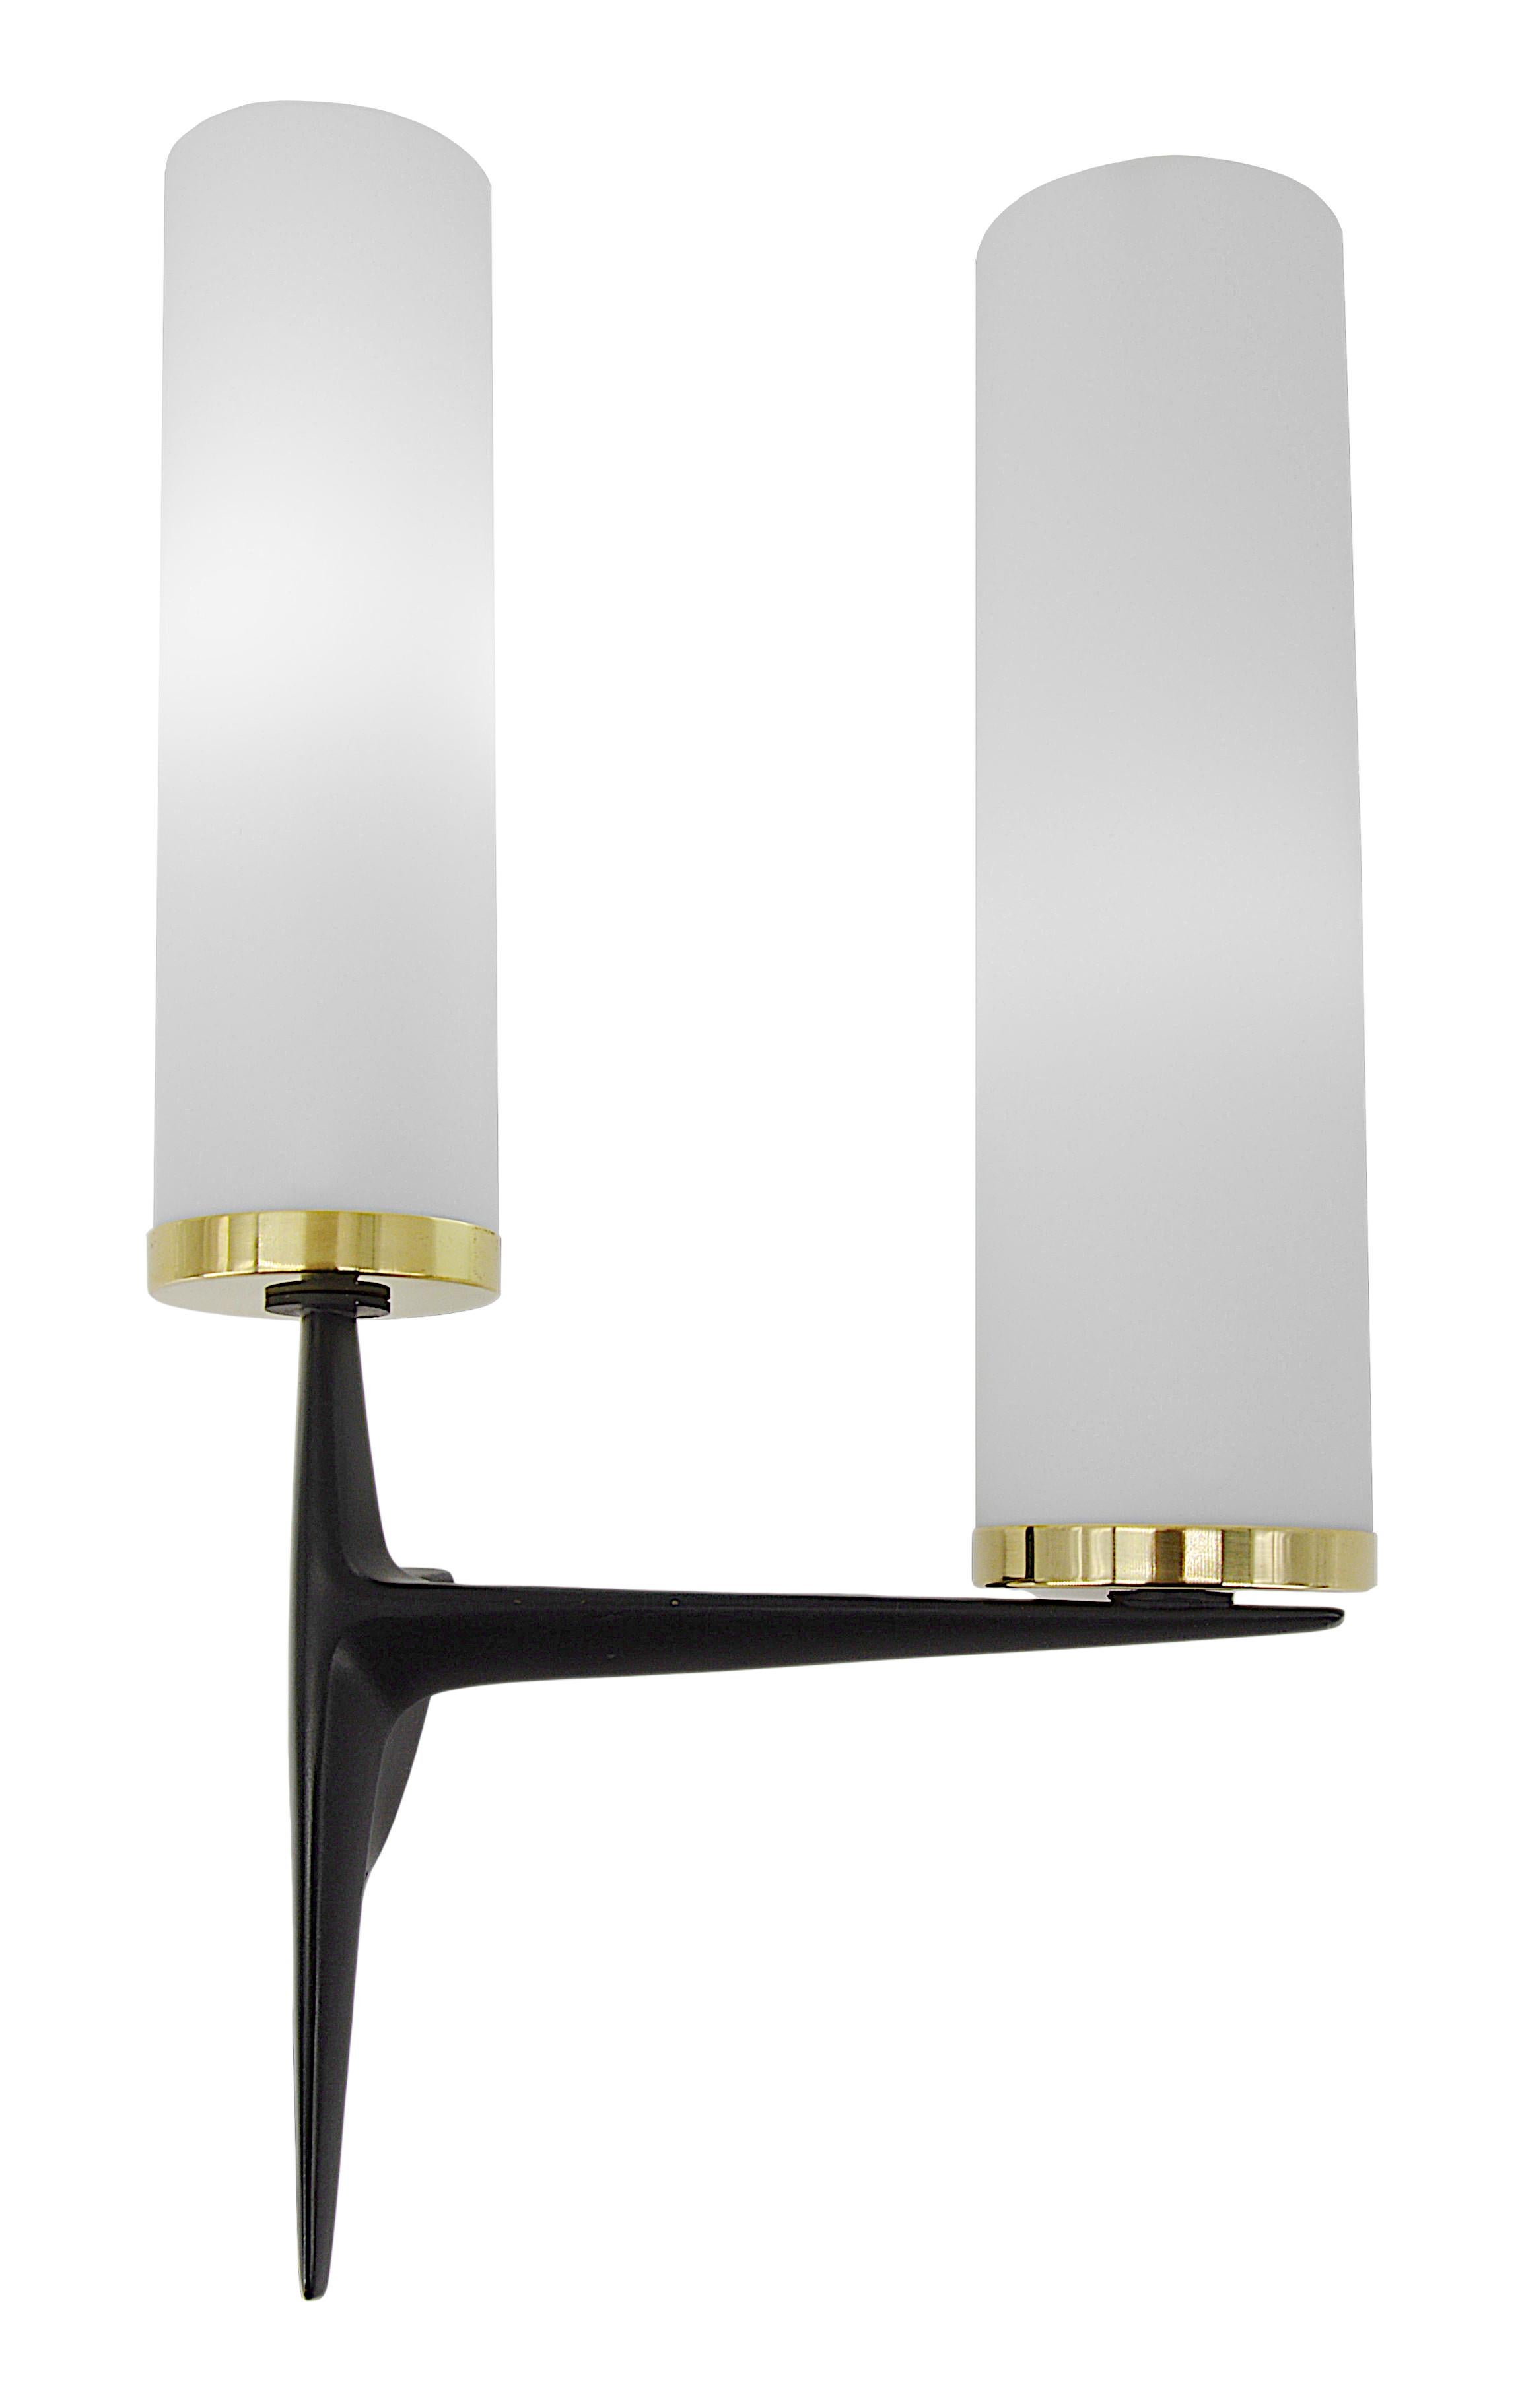 Midcentury double wall sconce by Arlus (Paris), France, 1950s. Measures: Height 15